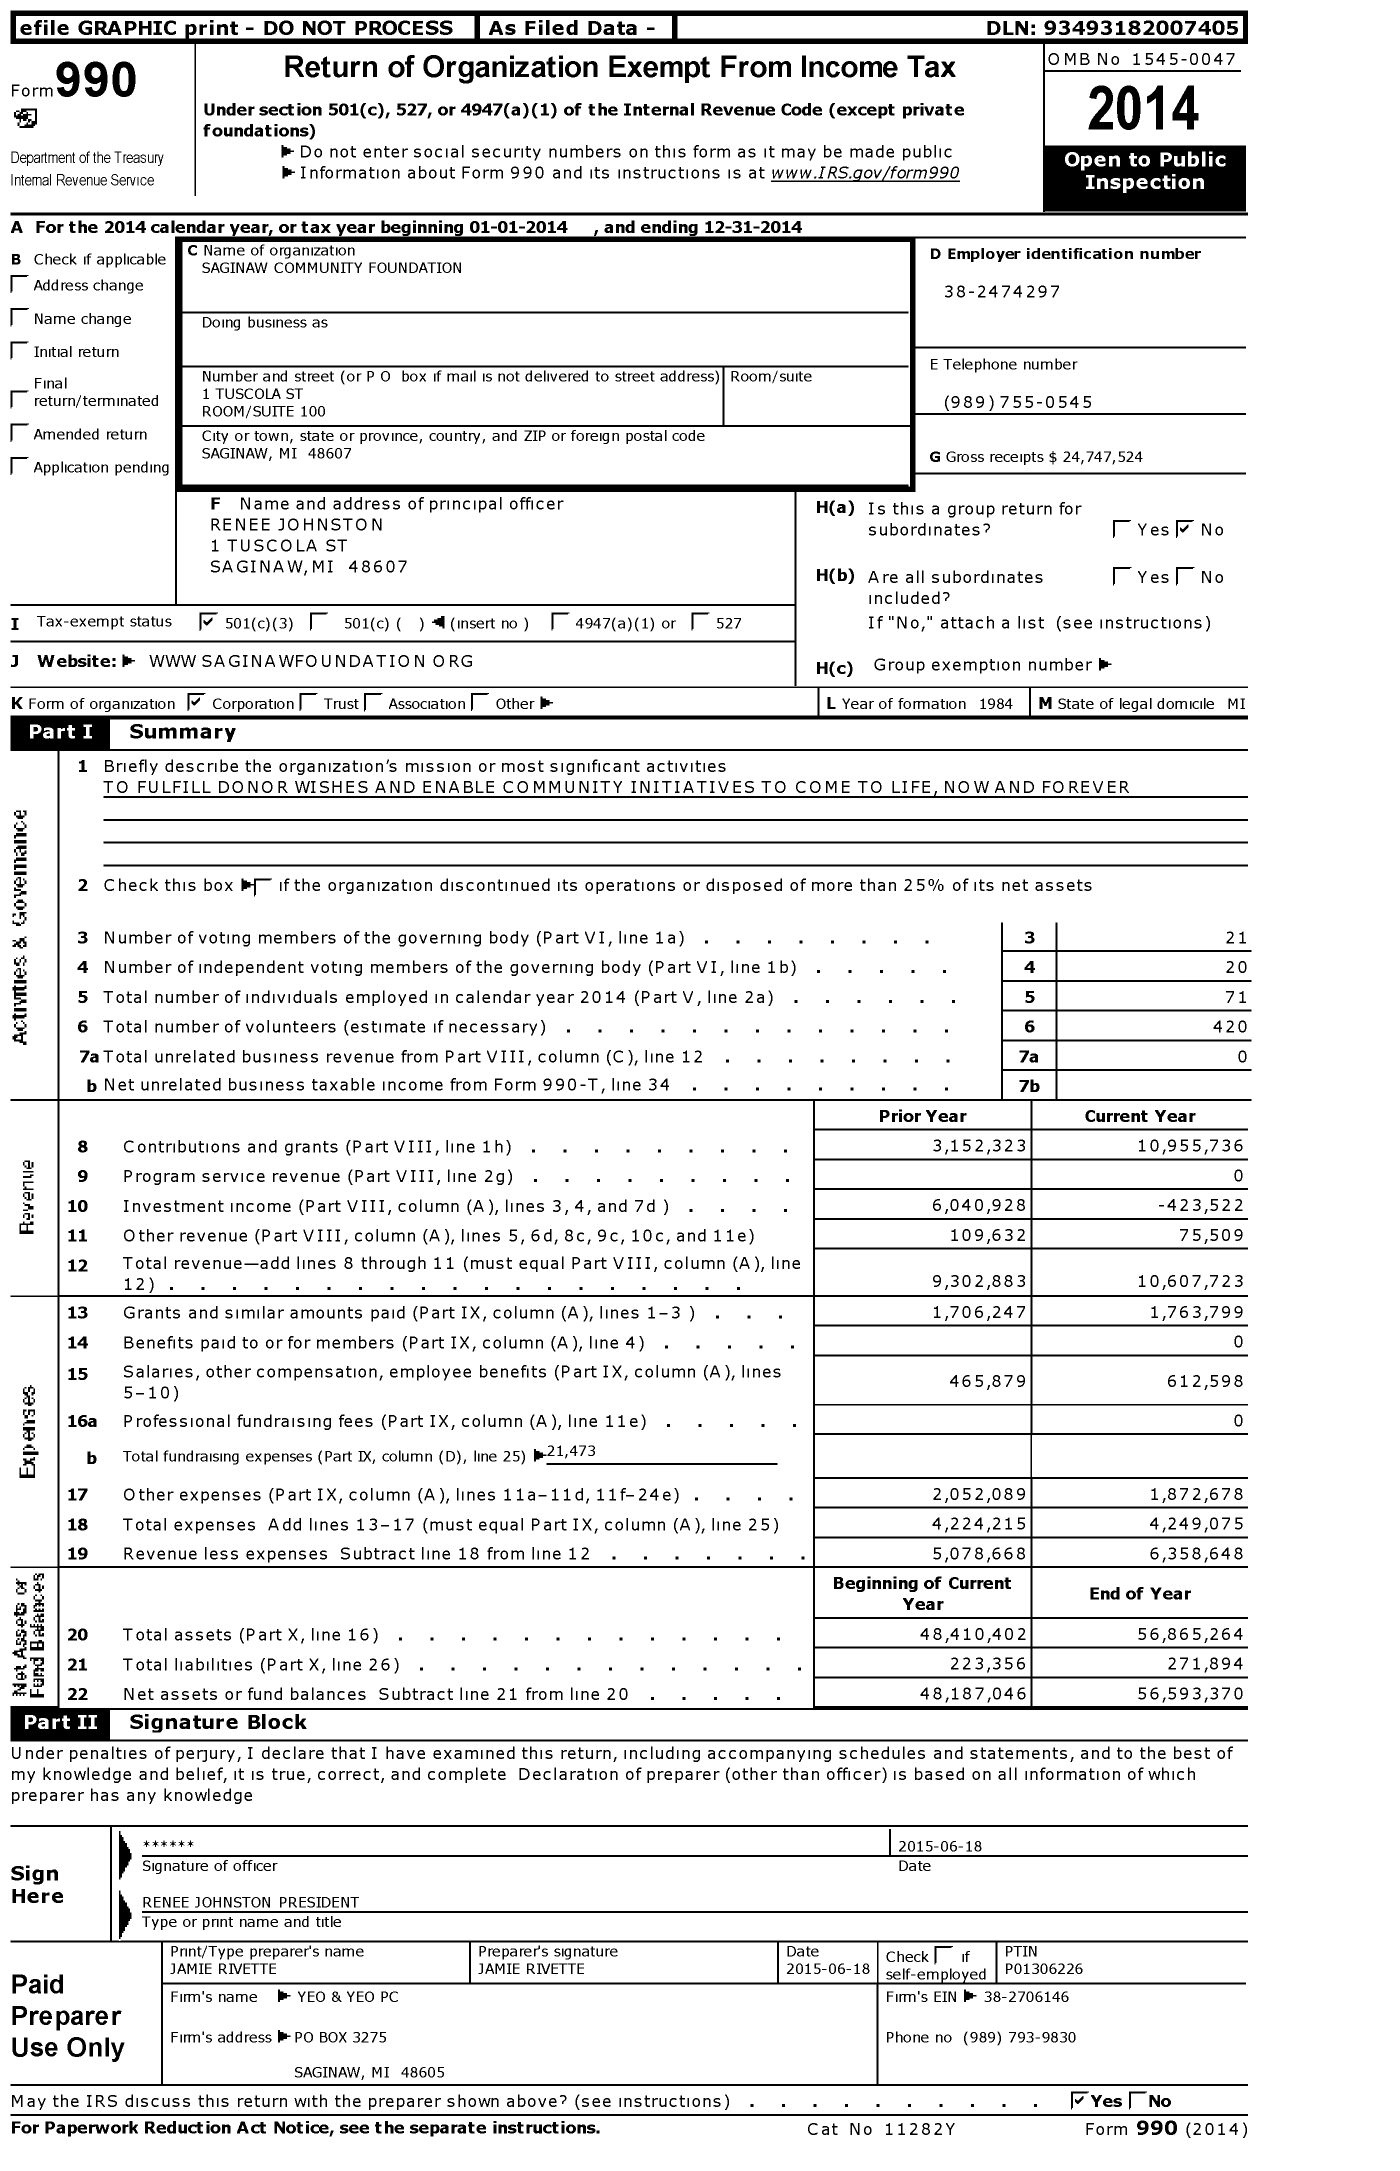 Image of first page of 2014 Form 990 for Saginaw Community Foundation (SCF)